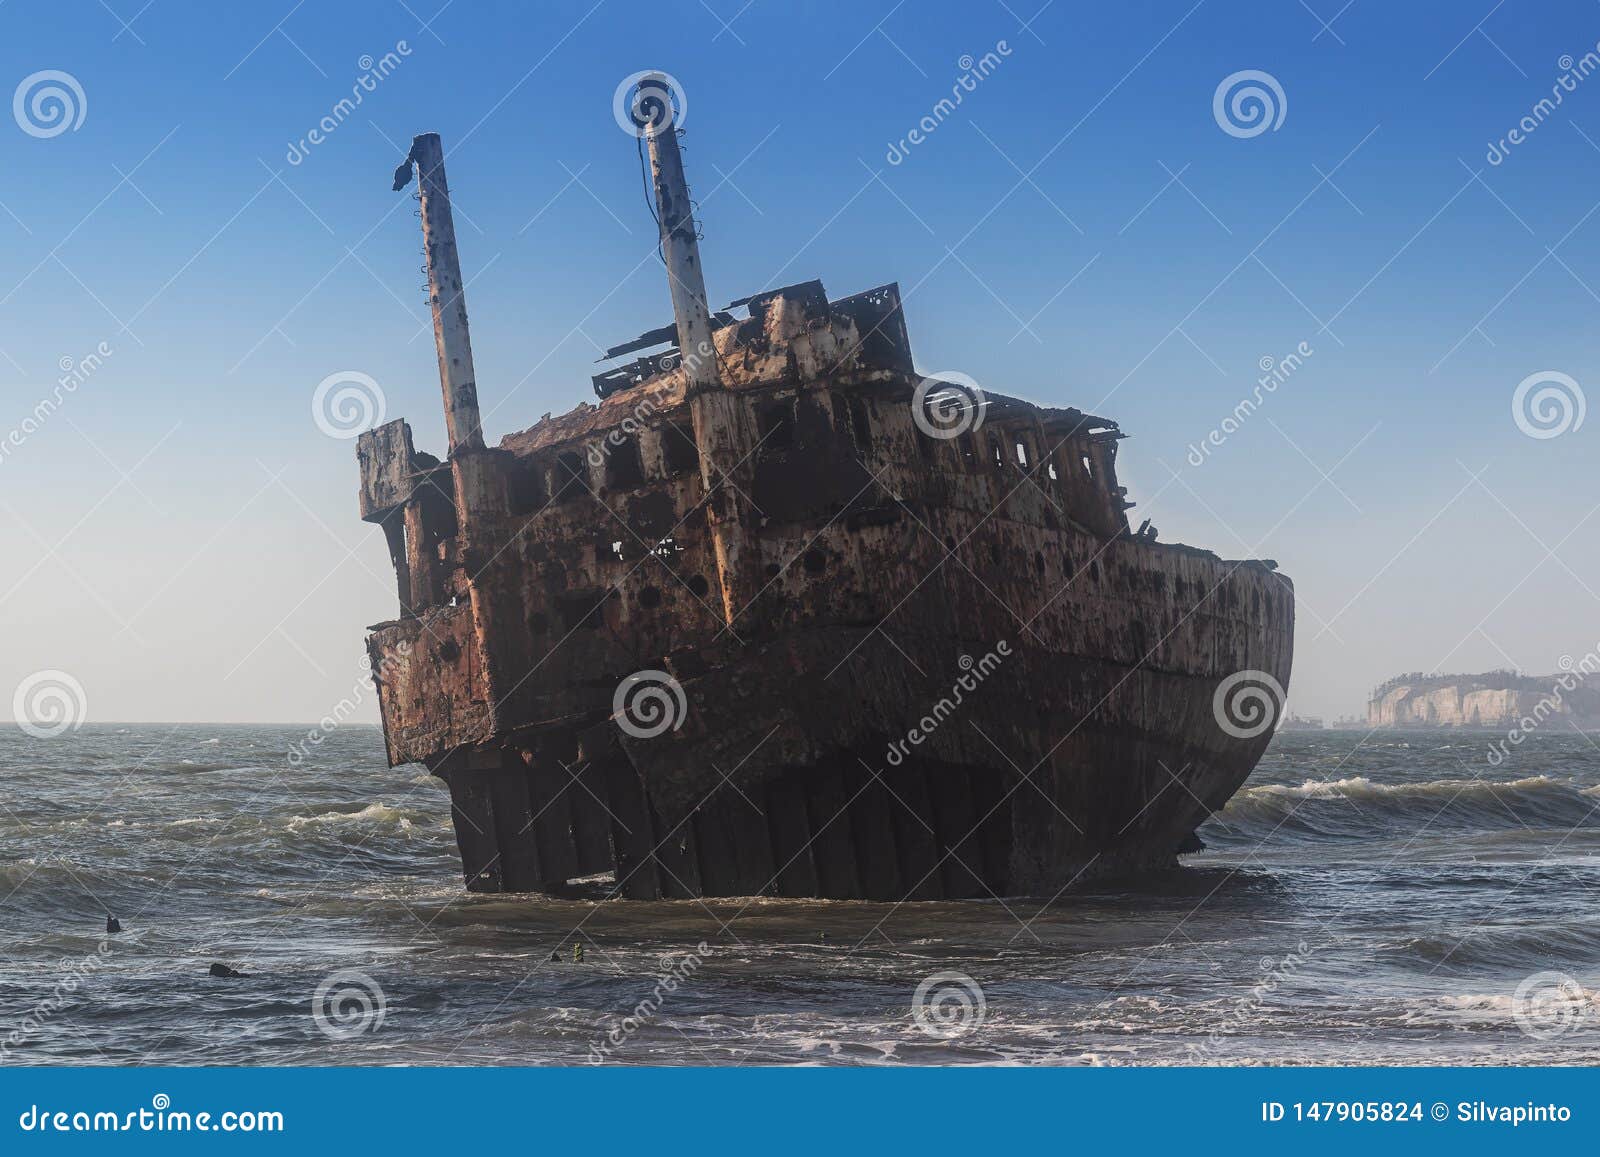 ship stranded near the beach shore of ships` cemeteries in angola